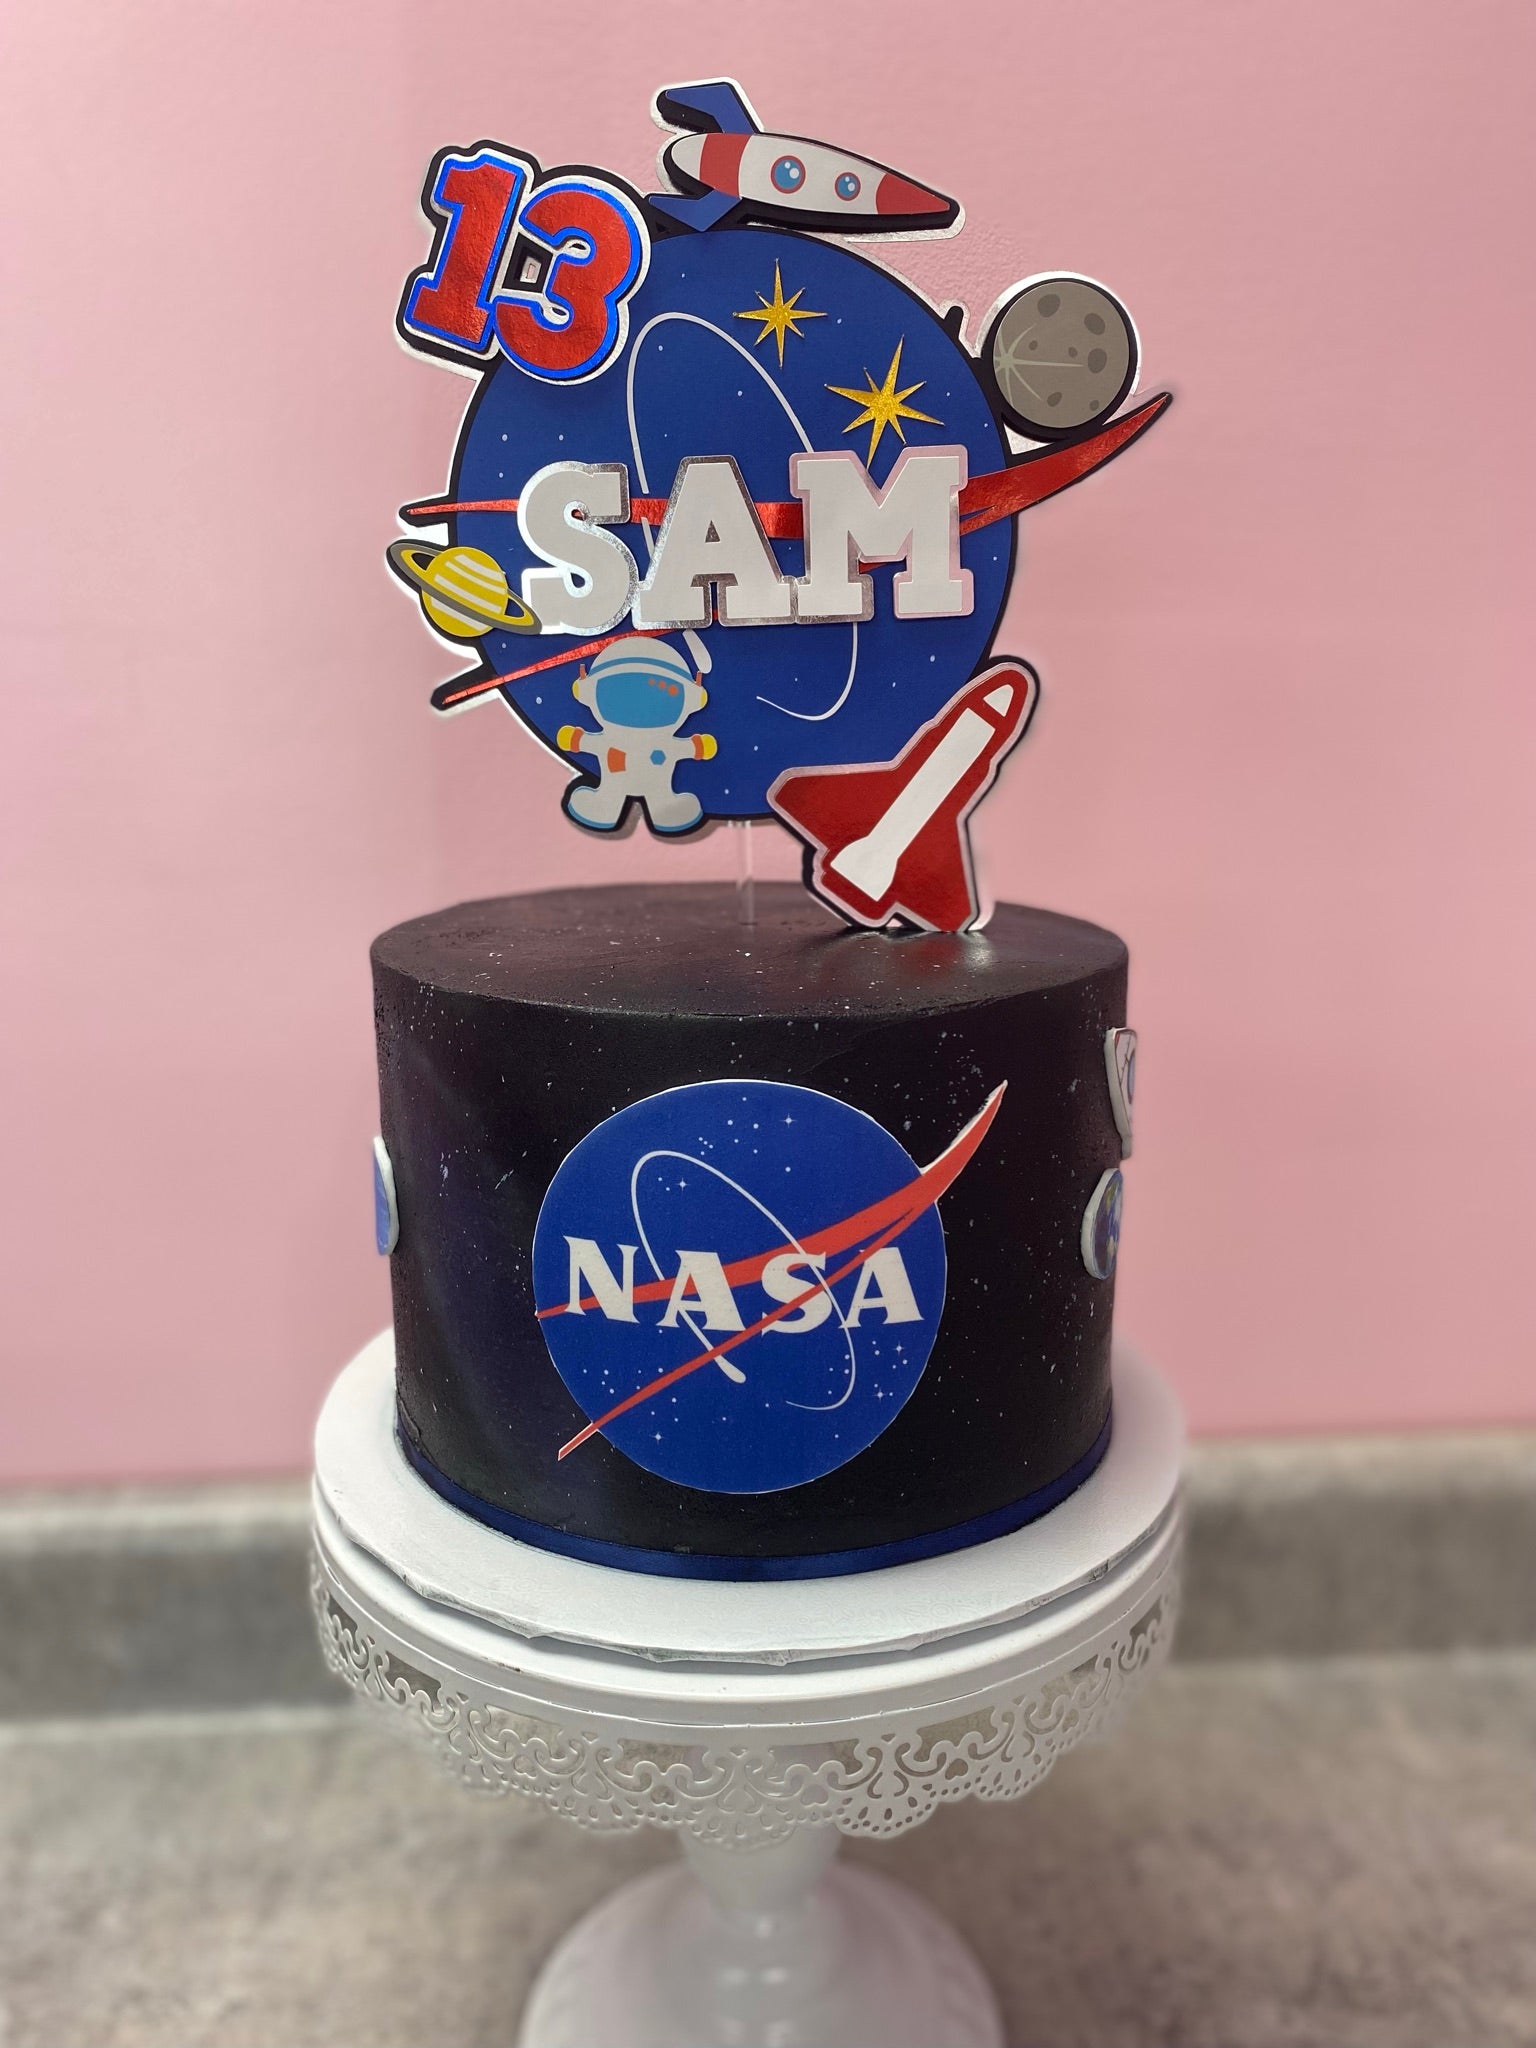 Space Shuttle groom's cake by ncspurlin on DeviantArt